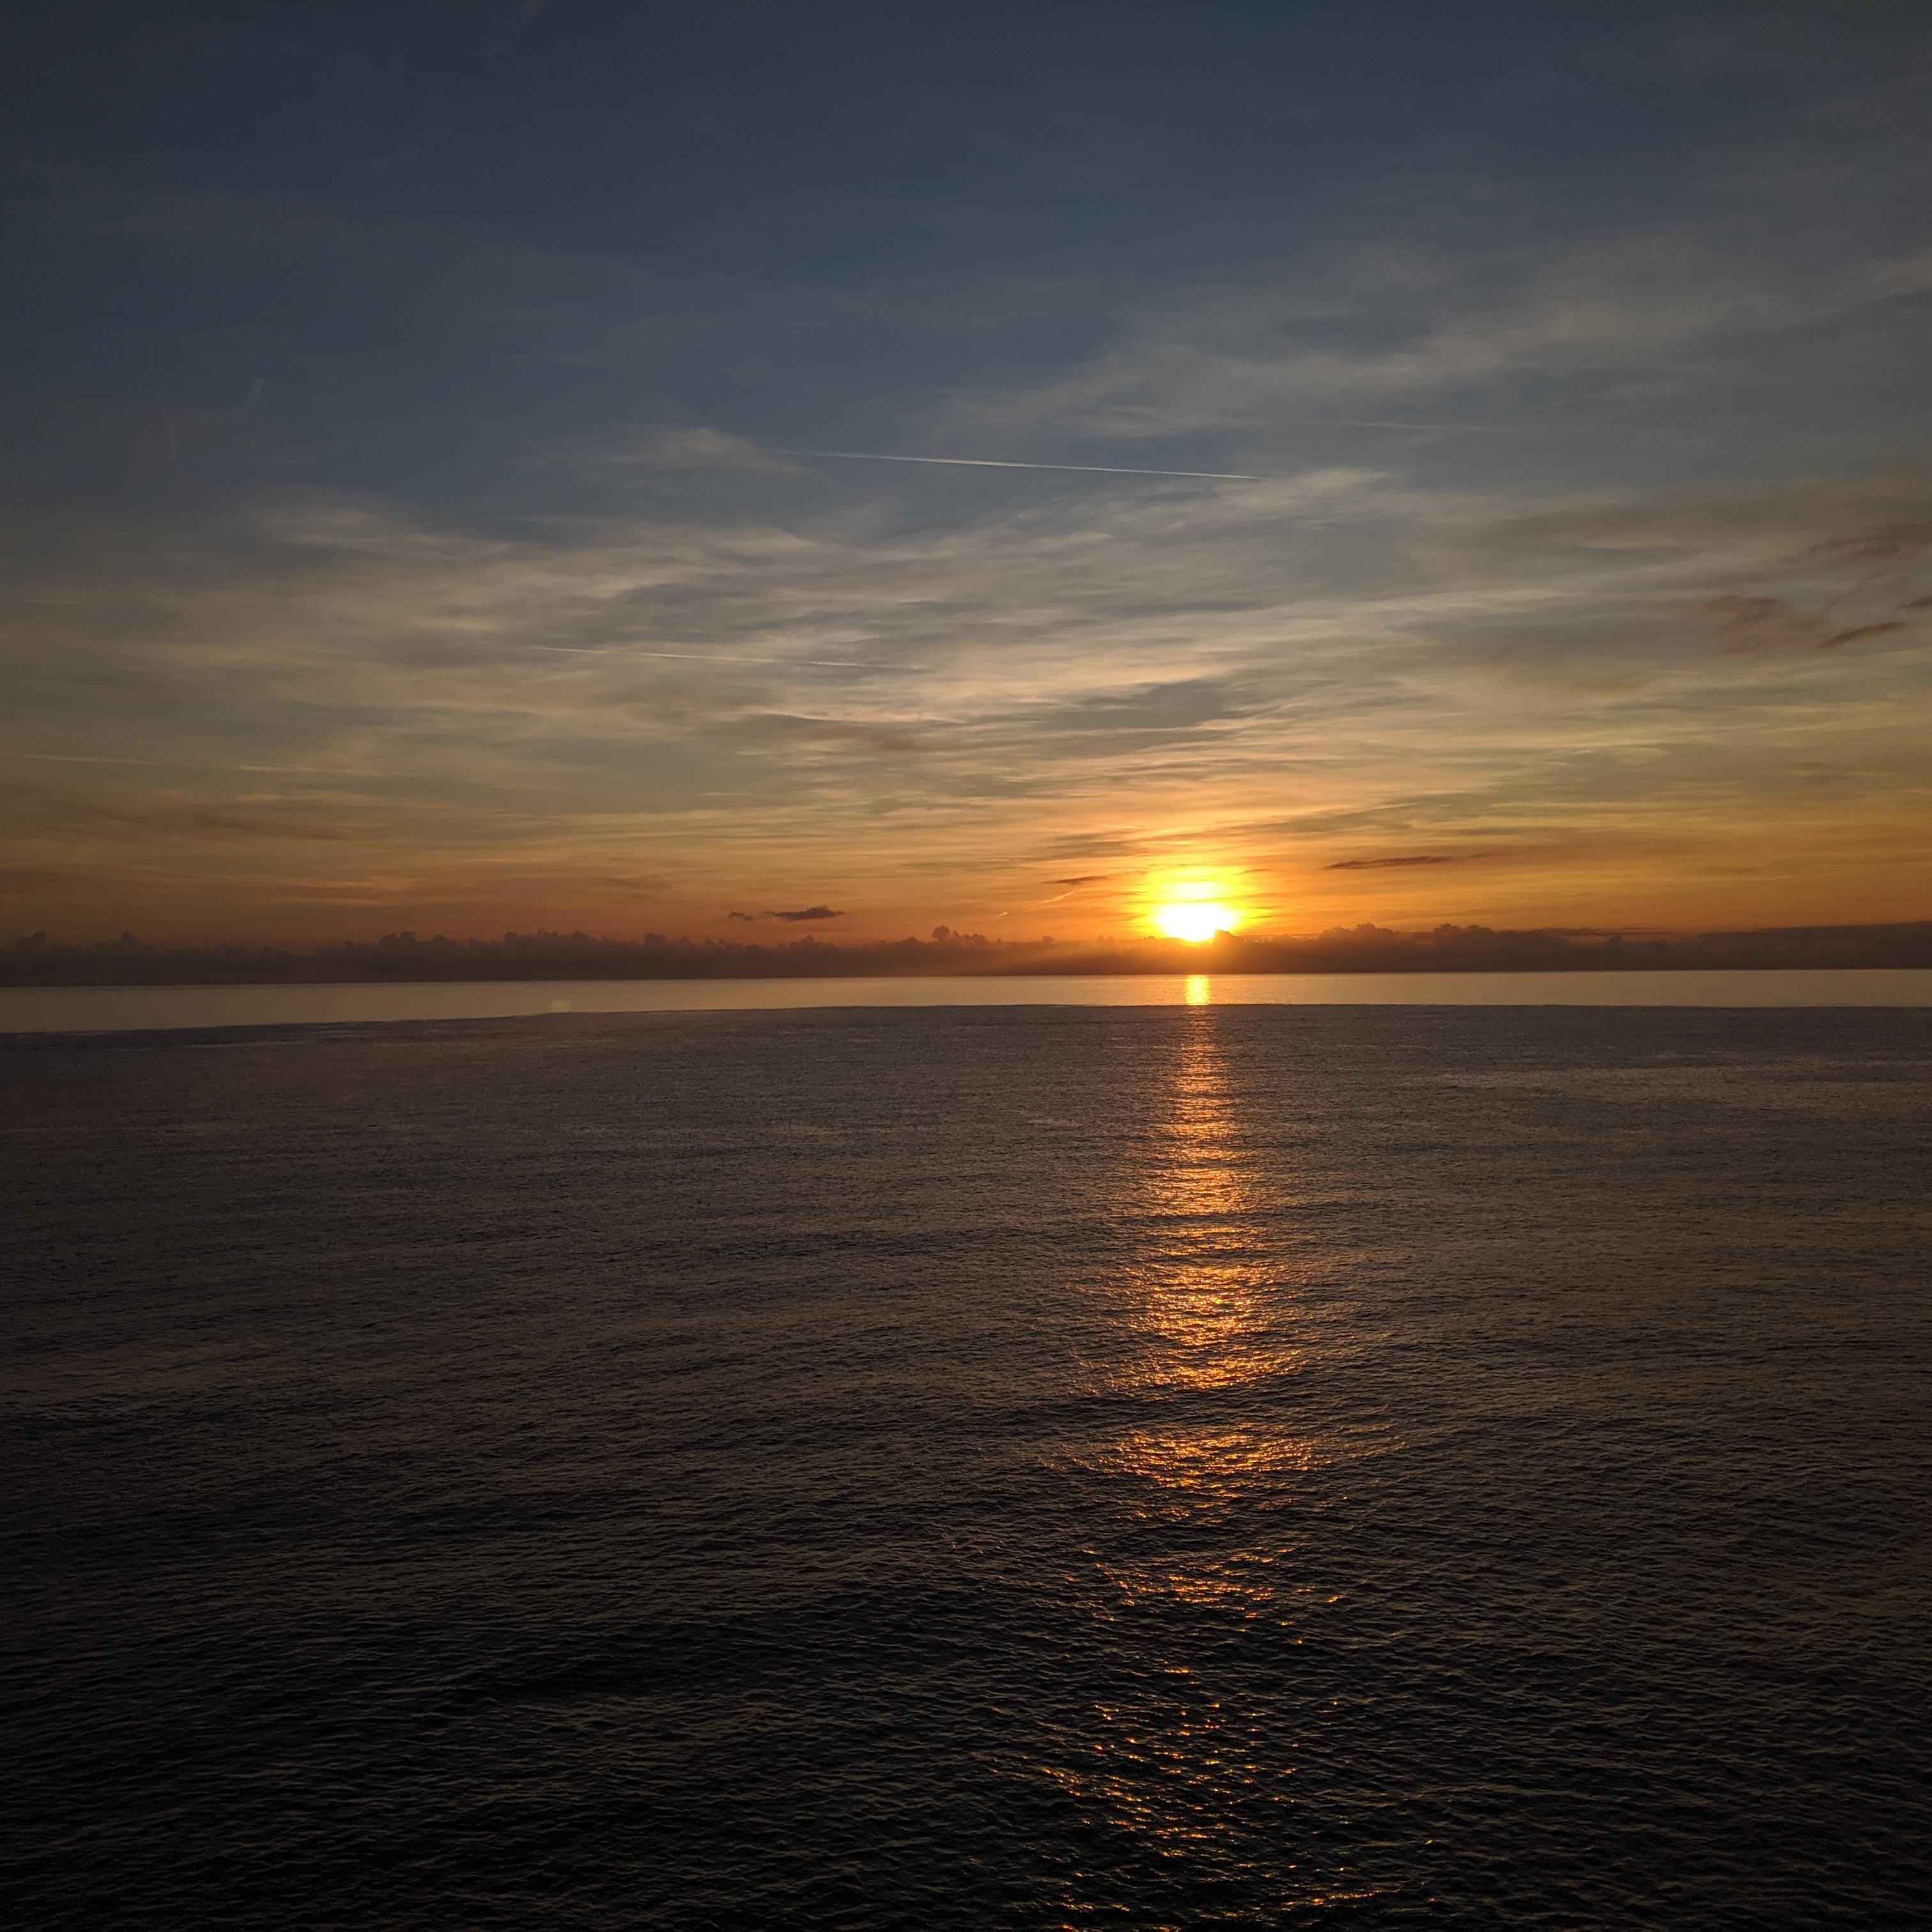 A photograph of sunset over the Mediterranean.